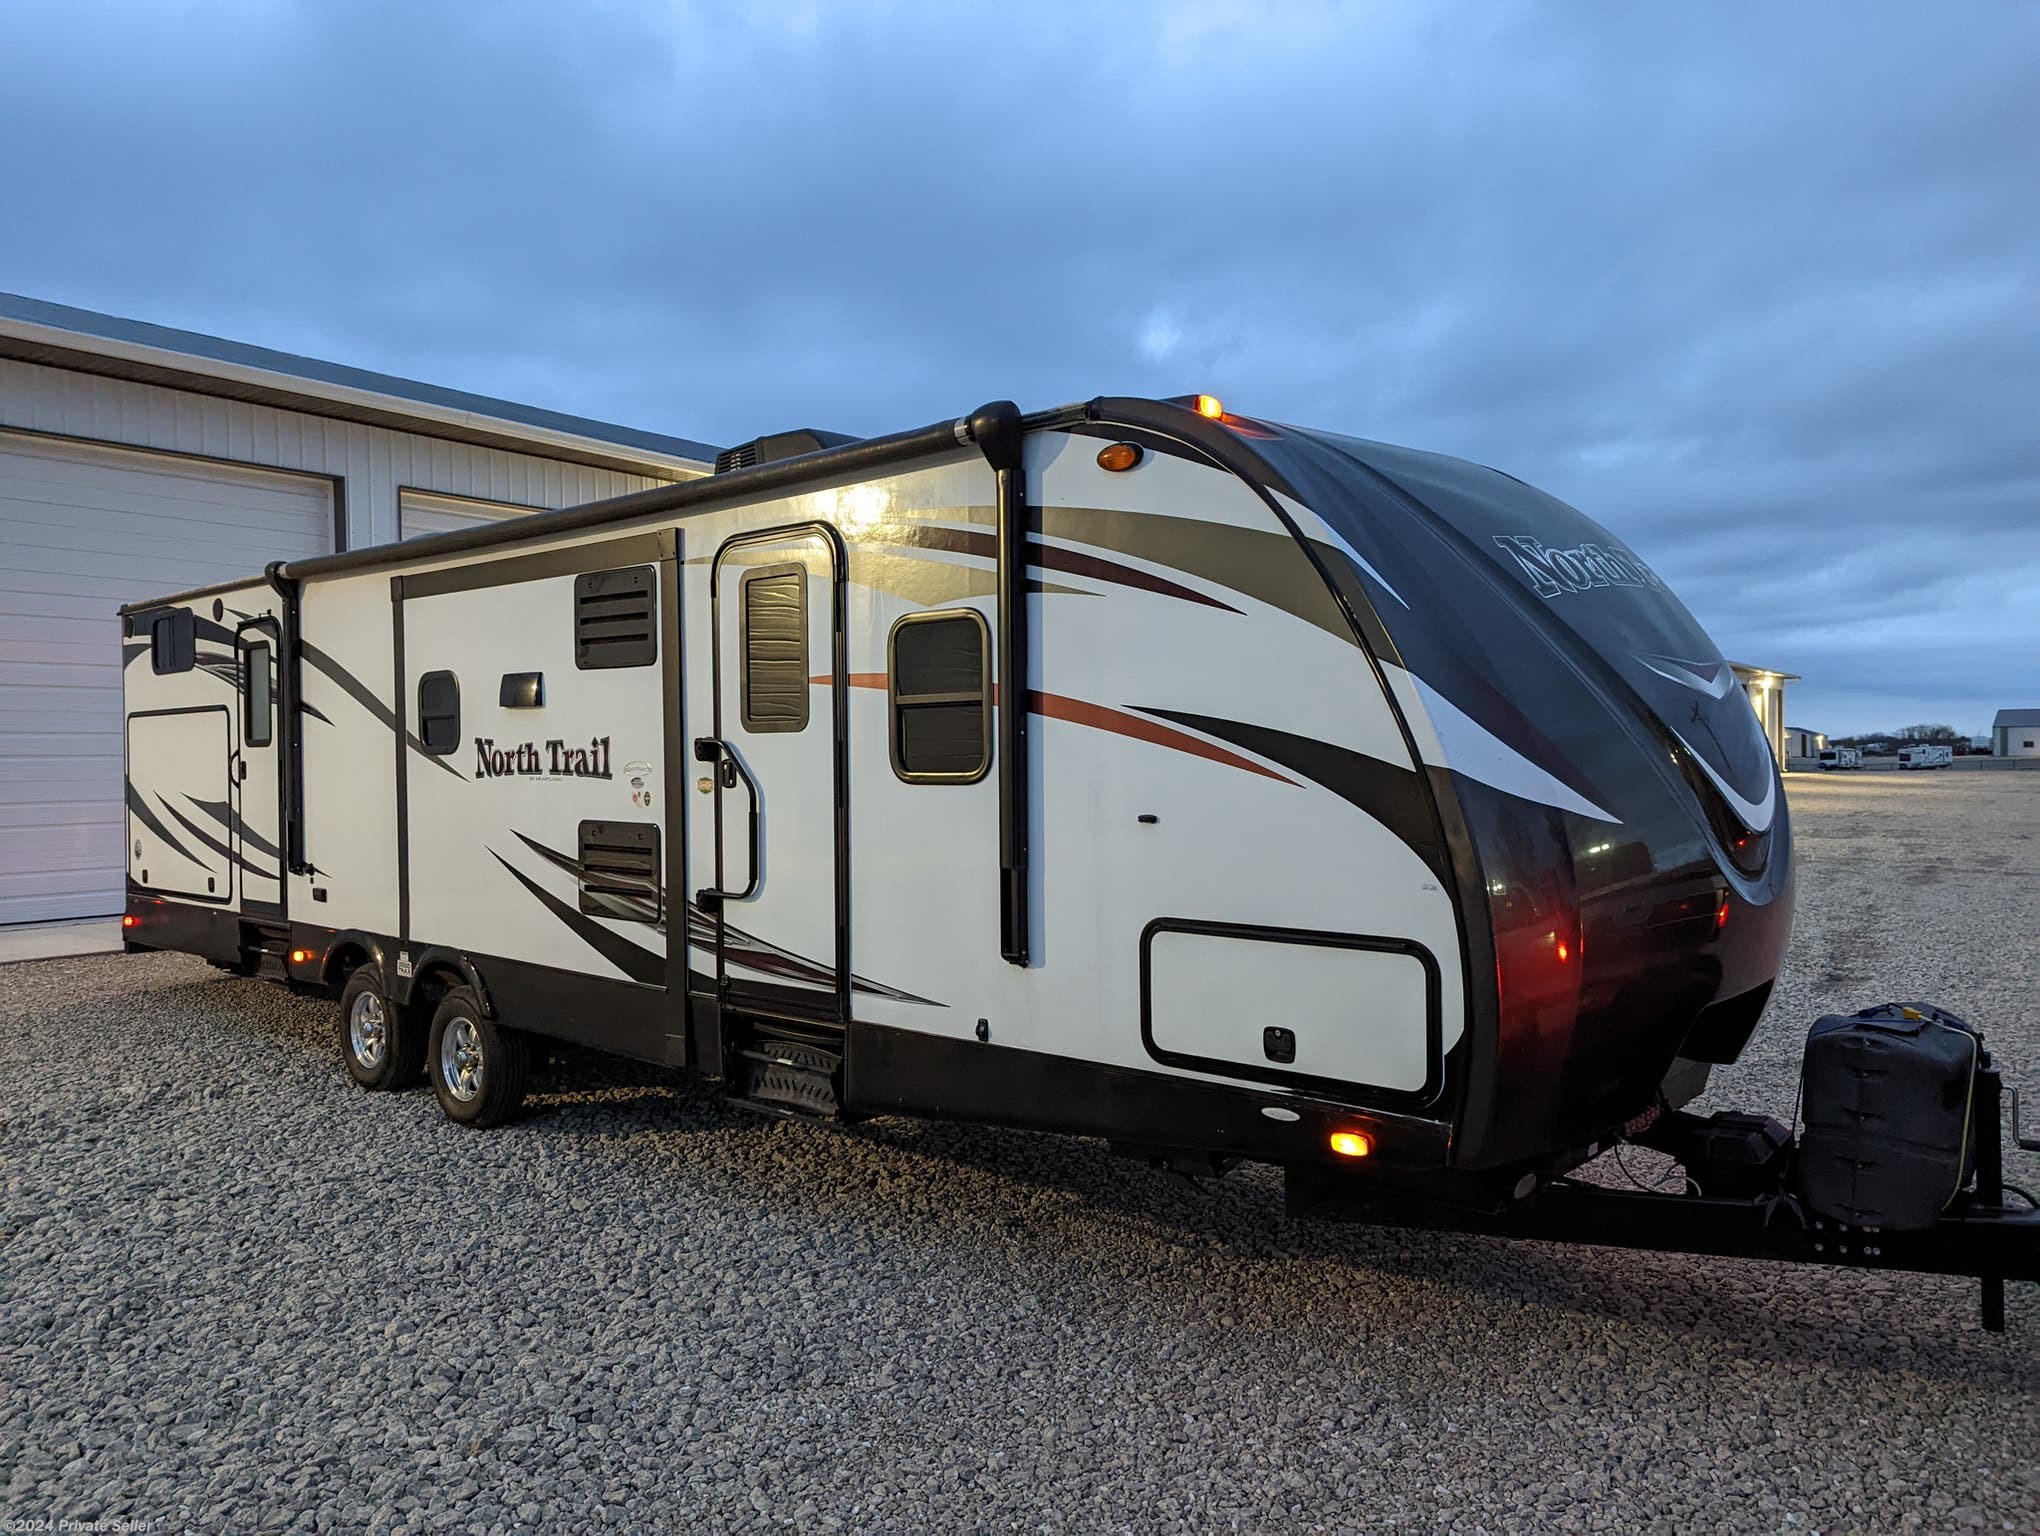 2015 Heartland North Trail NT KING 33BKSS Caliber Series RV for Sale in